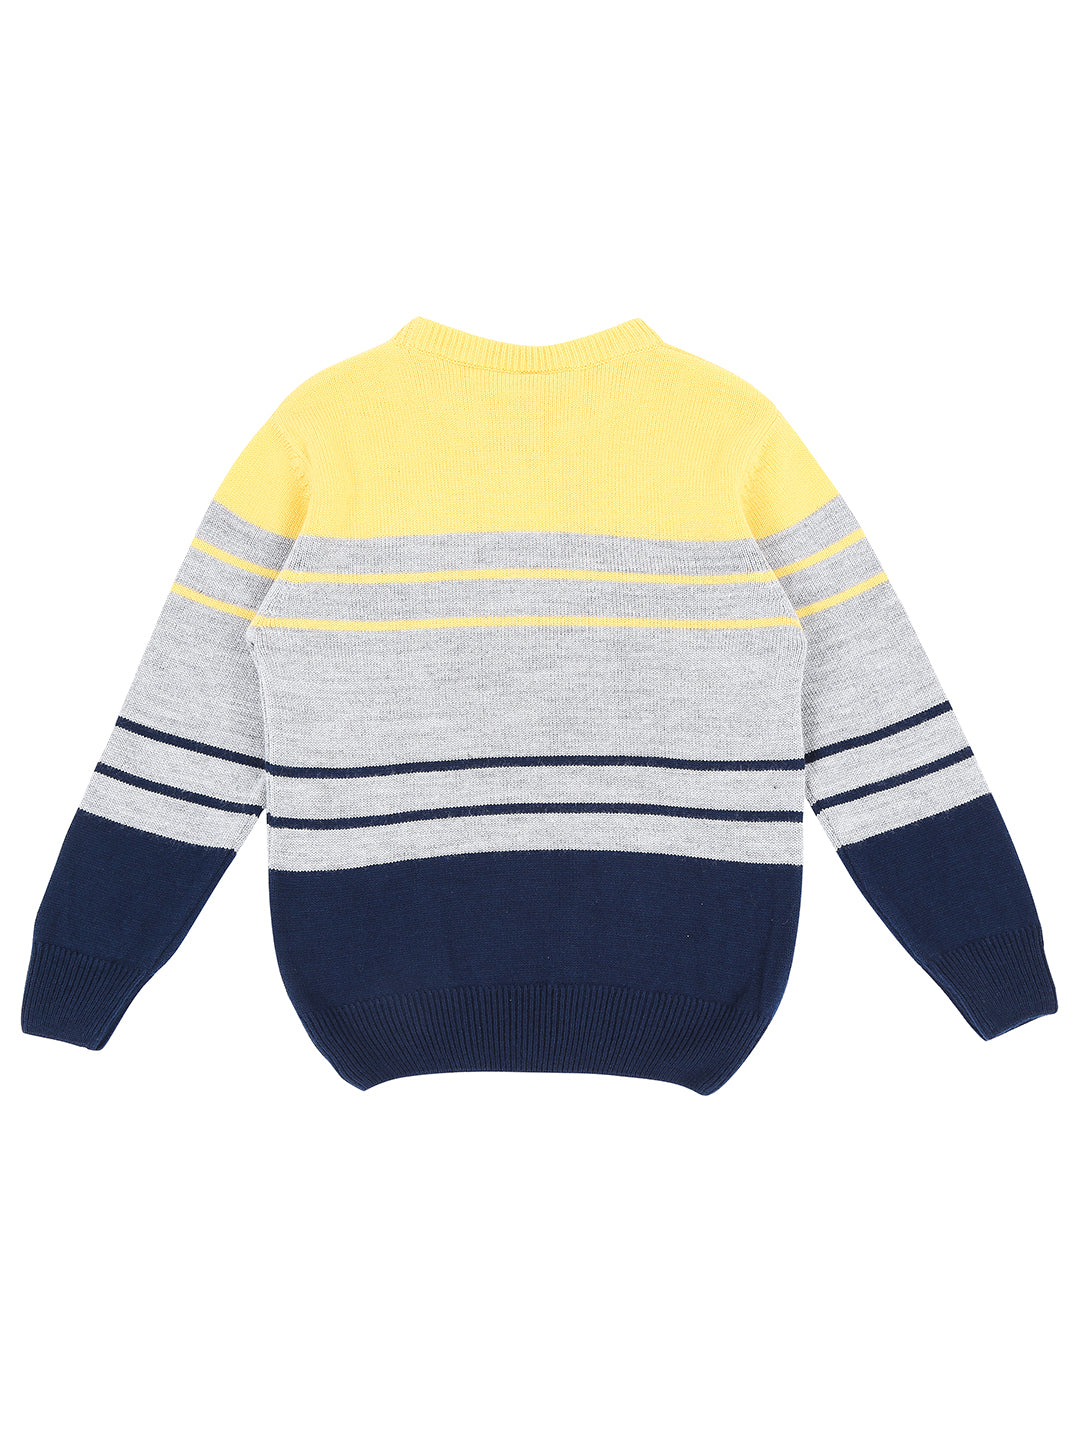 Boys Multicolor Woven Striped Full Sleeves Sweater